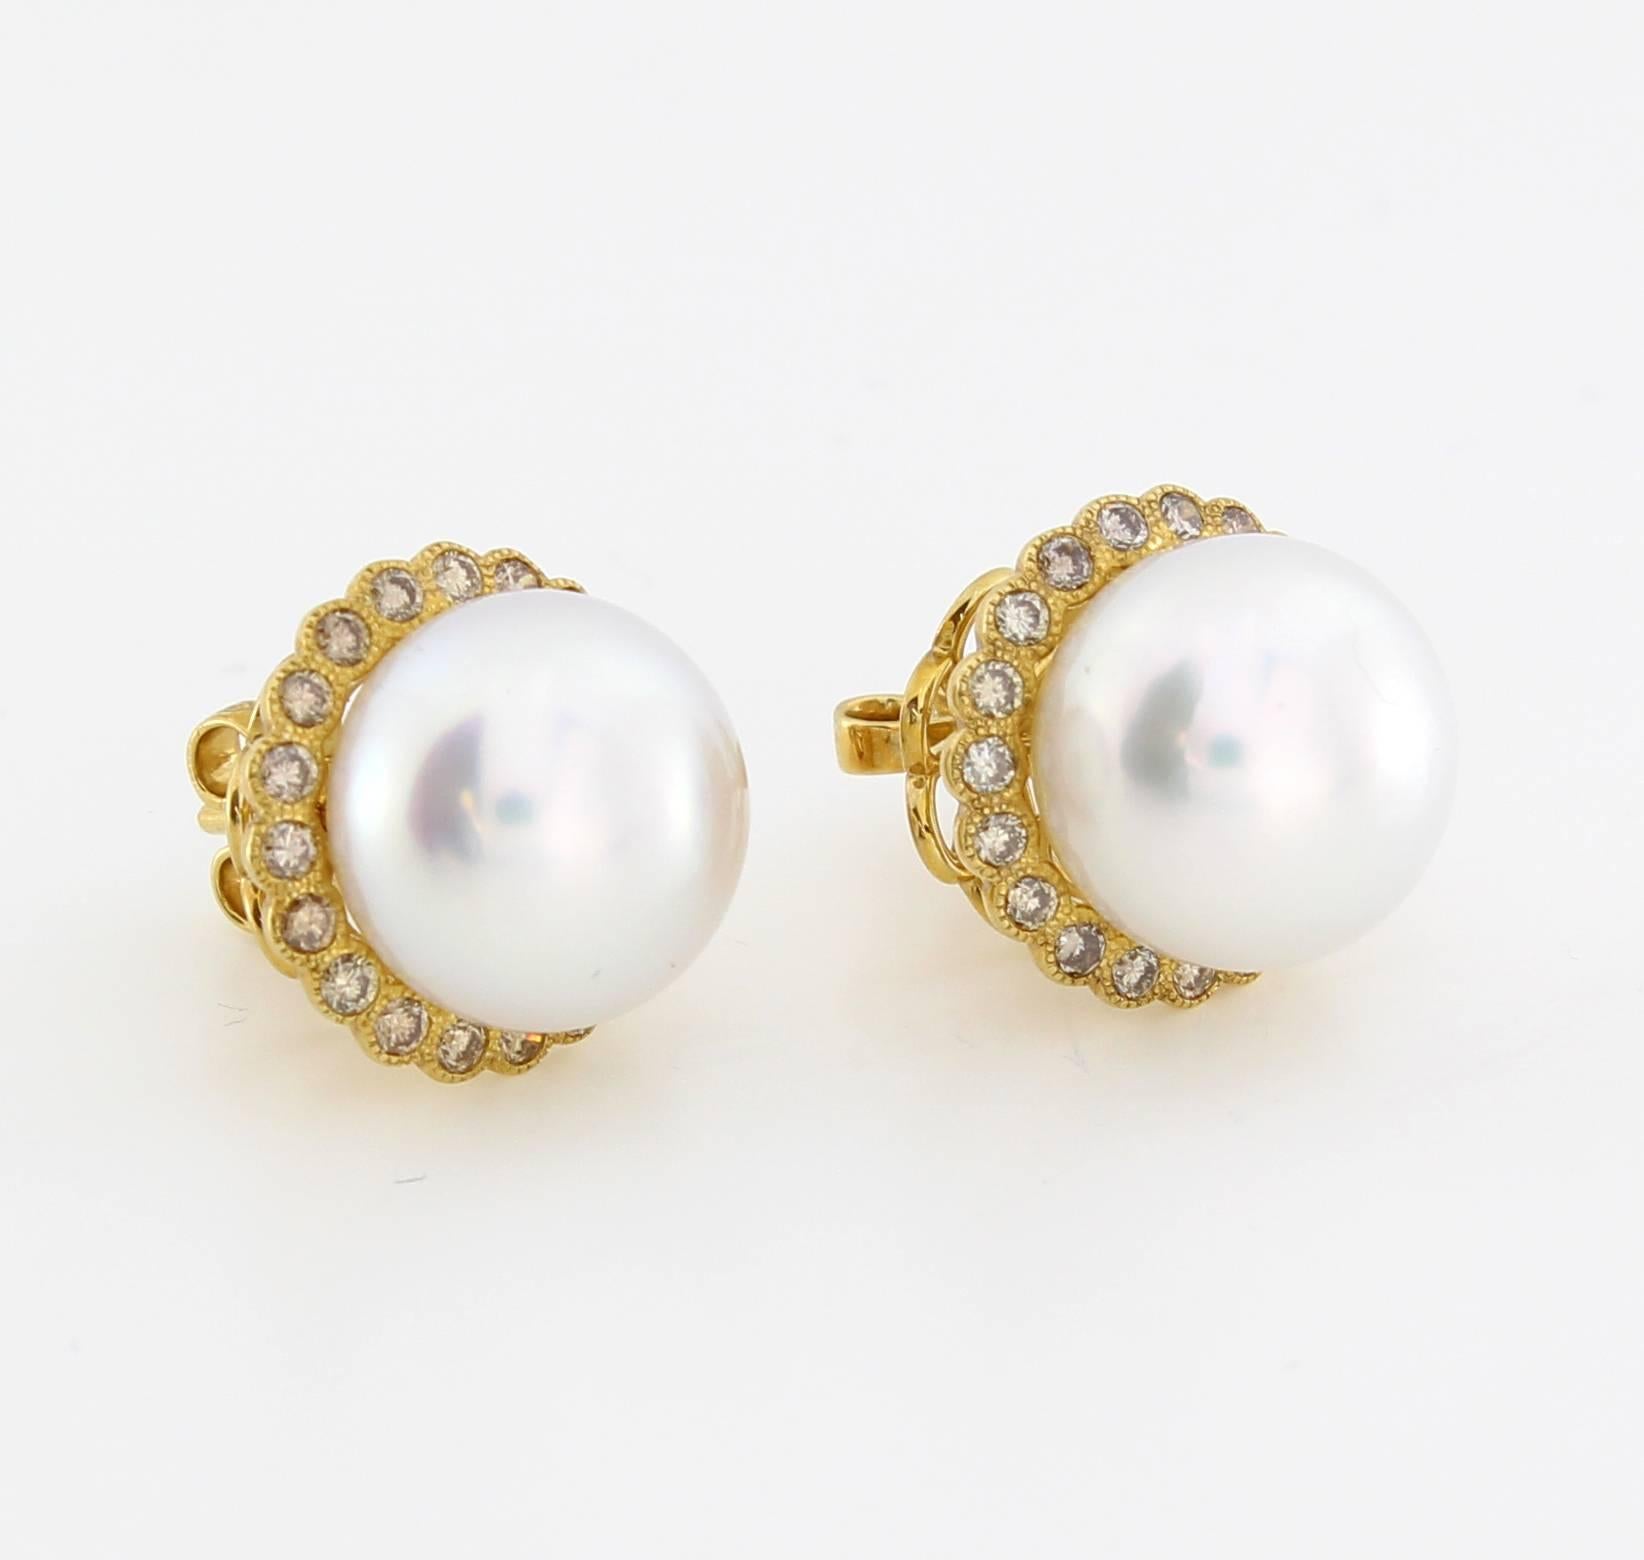 The Sphere Stud Earrings are from the AUTORE Timeless Collection.
This piece is crafted in 18k Yellow Gold with Brown Diamonds (0.88ct) and 12mm High Button White South Sea Pearls. 